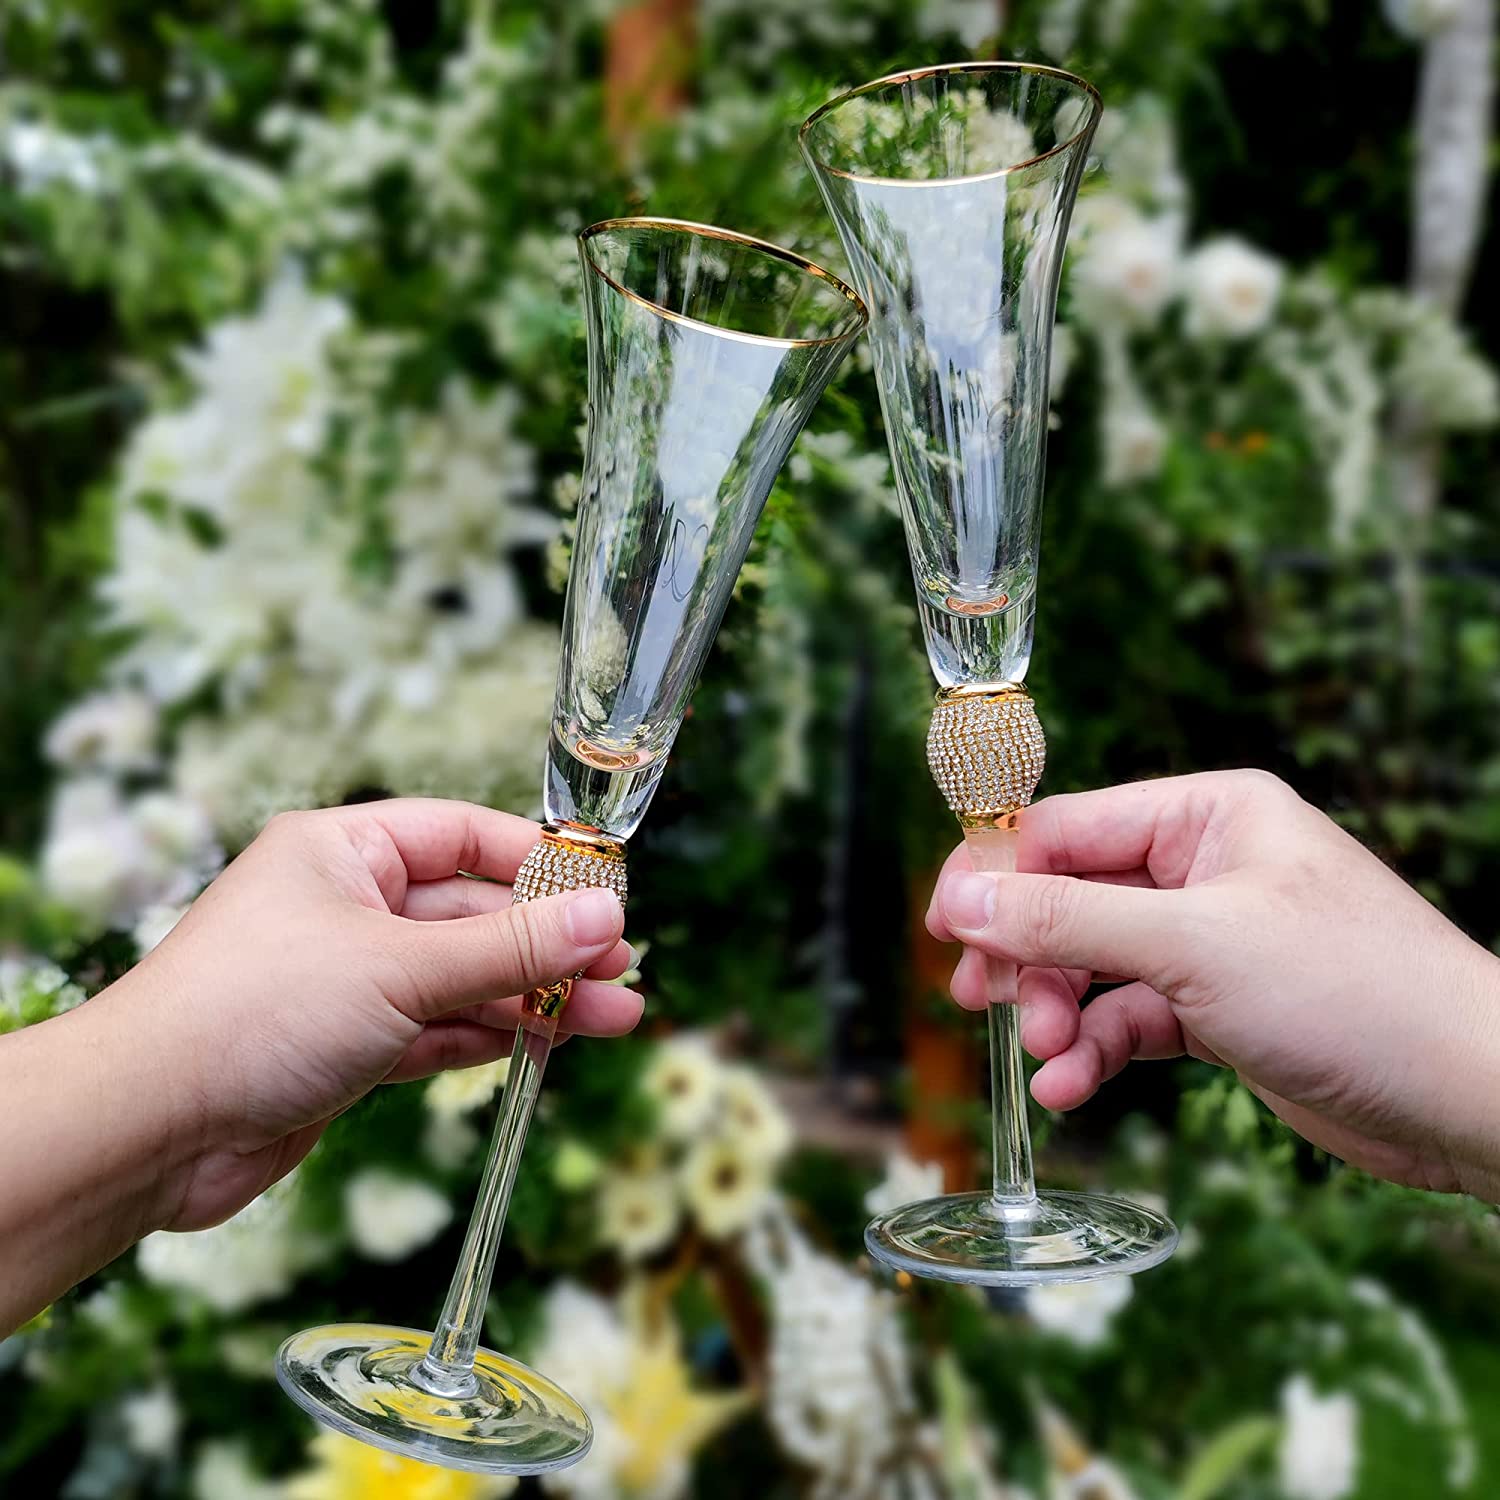 Wedding Gifts Champagne Flutes Set of 2, Champagne Glasses for Wedding, Mr  and Mrs Toasting Glasses, Wedding Decor, Bride and Groom